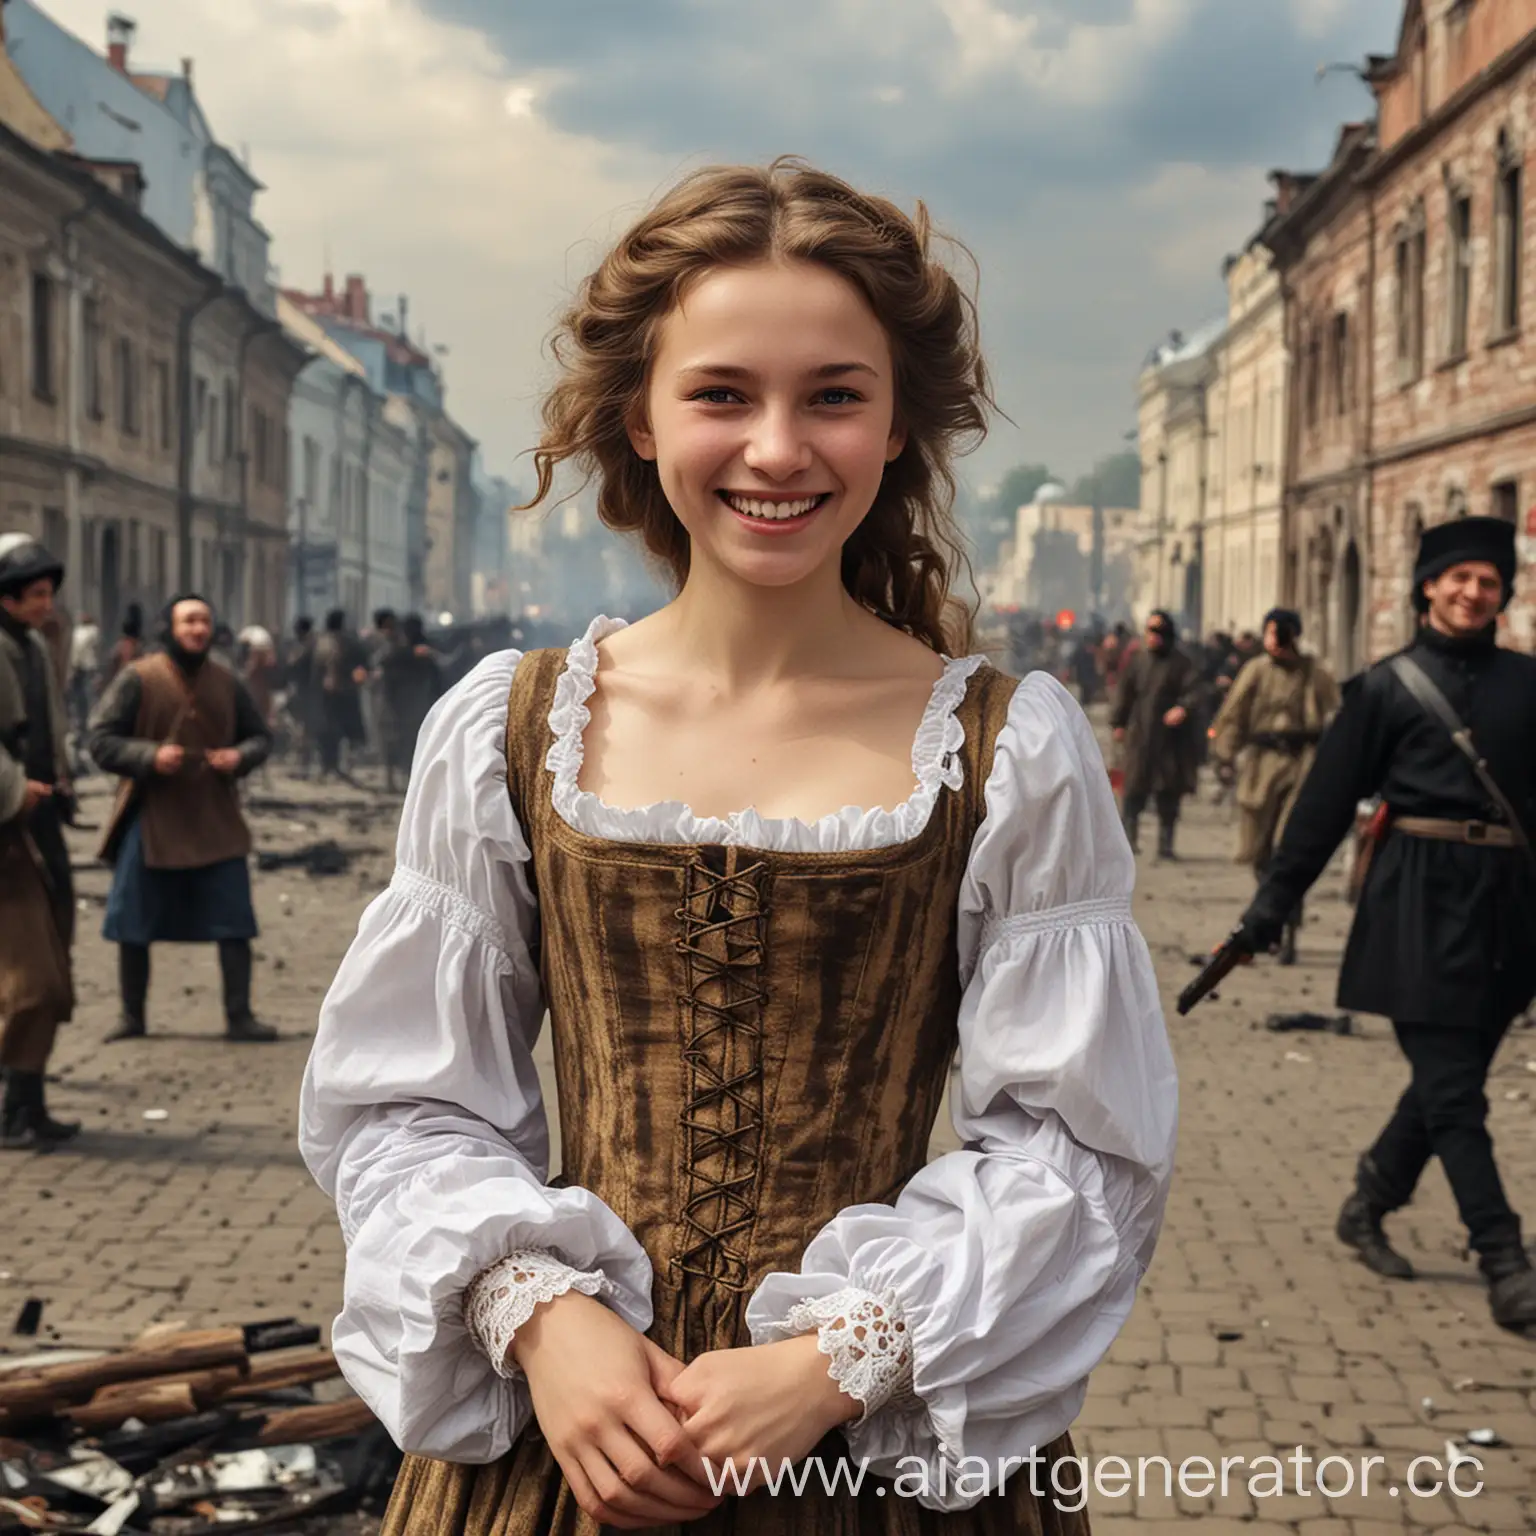 Cheerful-Girl-Amidst-Russian-Time-of-Troubles-Riots